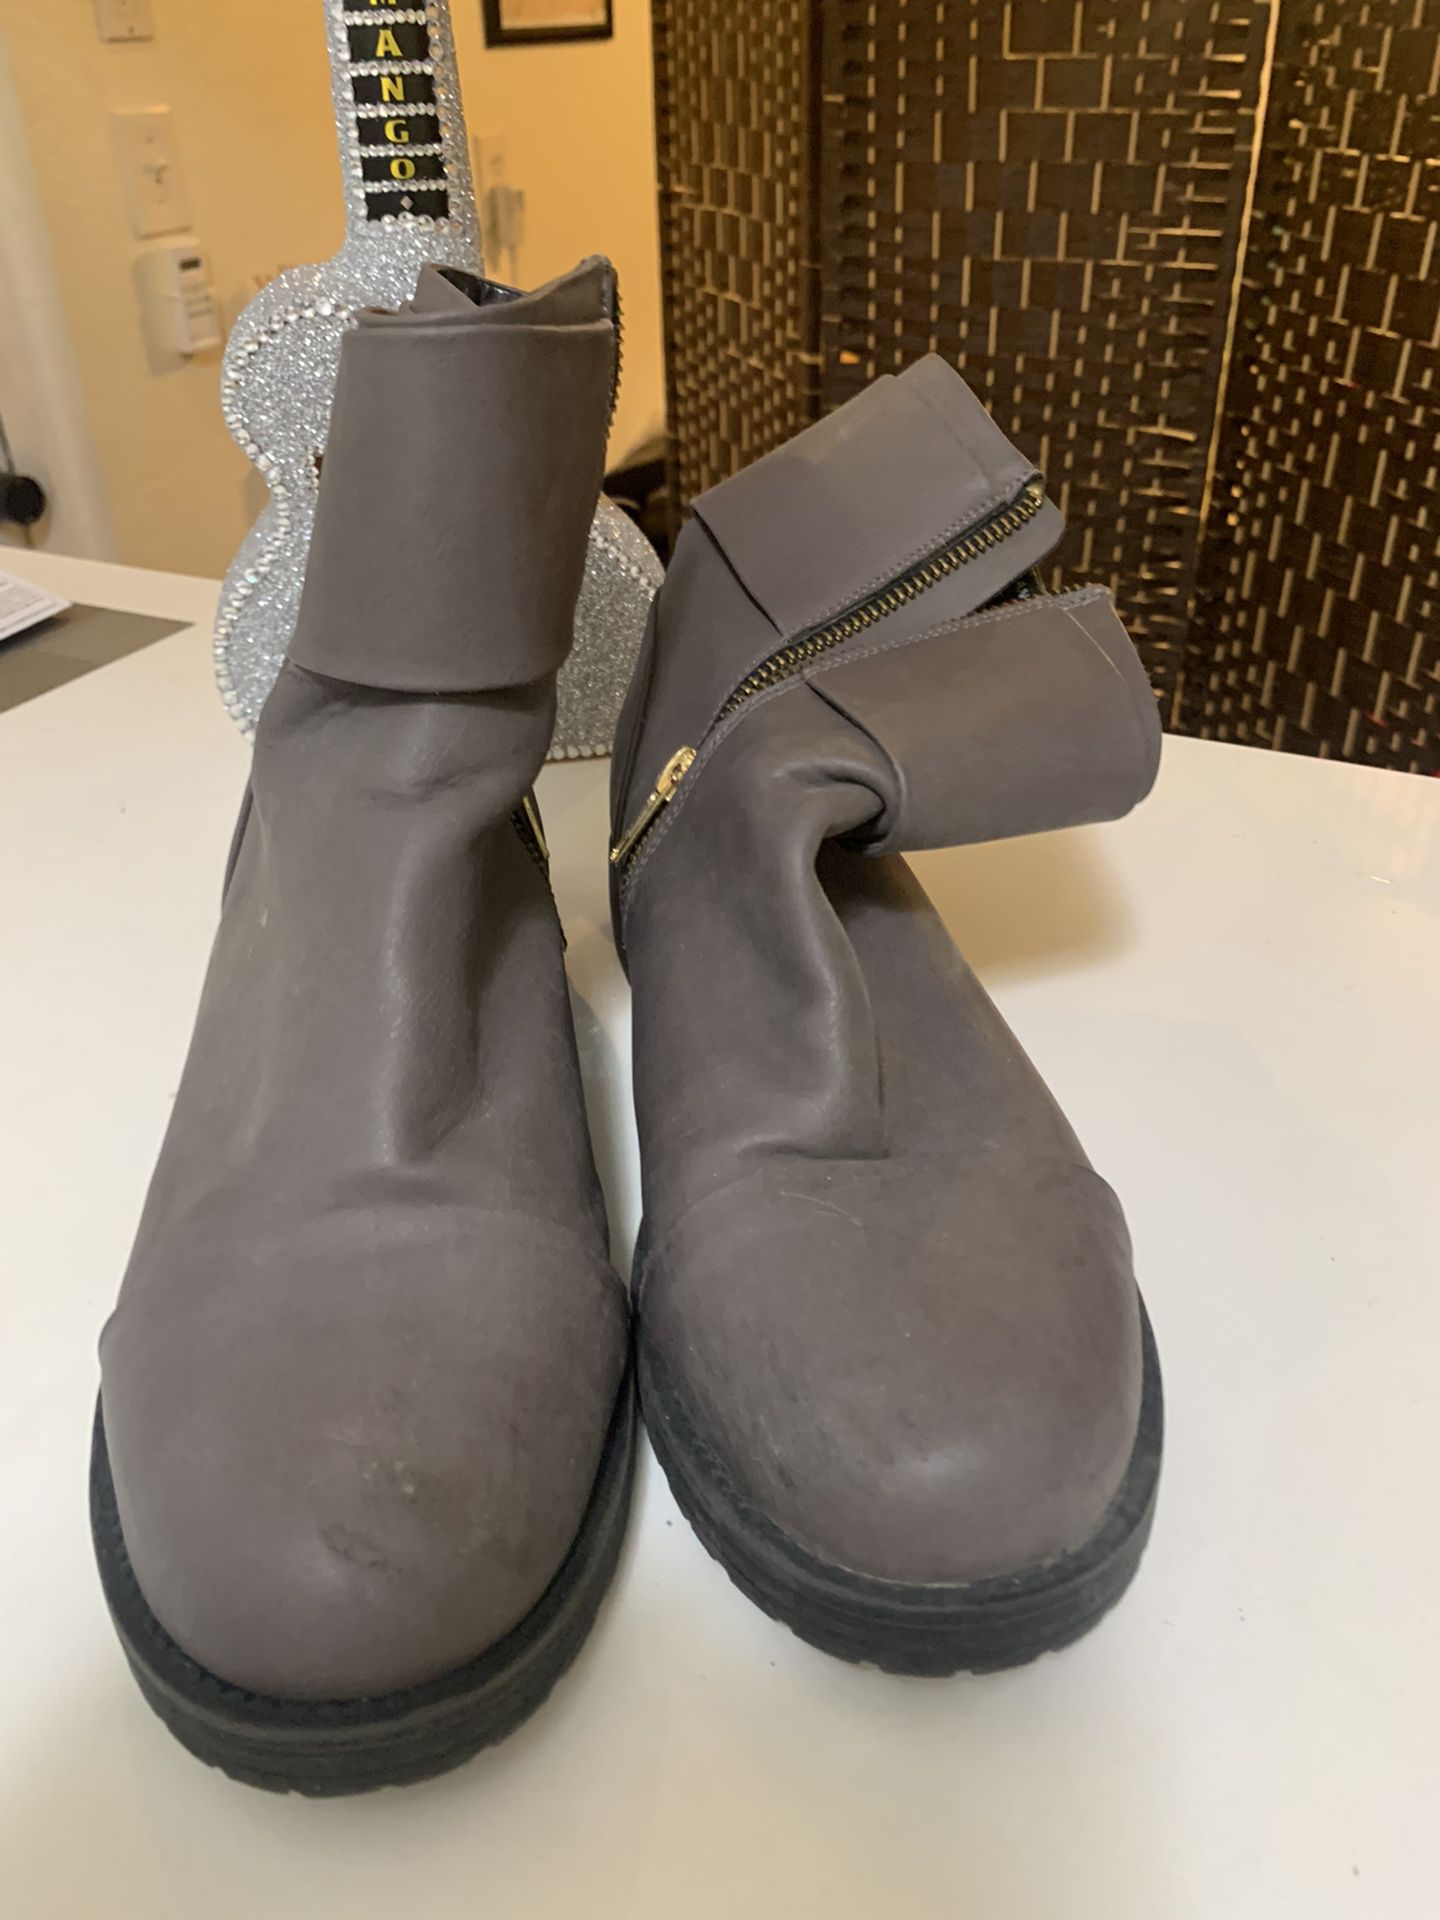 Gray mid boots/ botas grises casuales